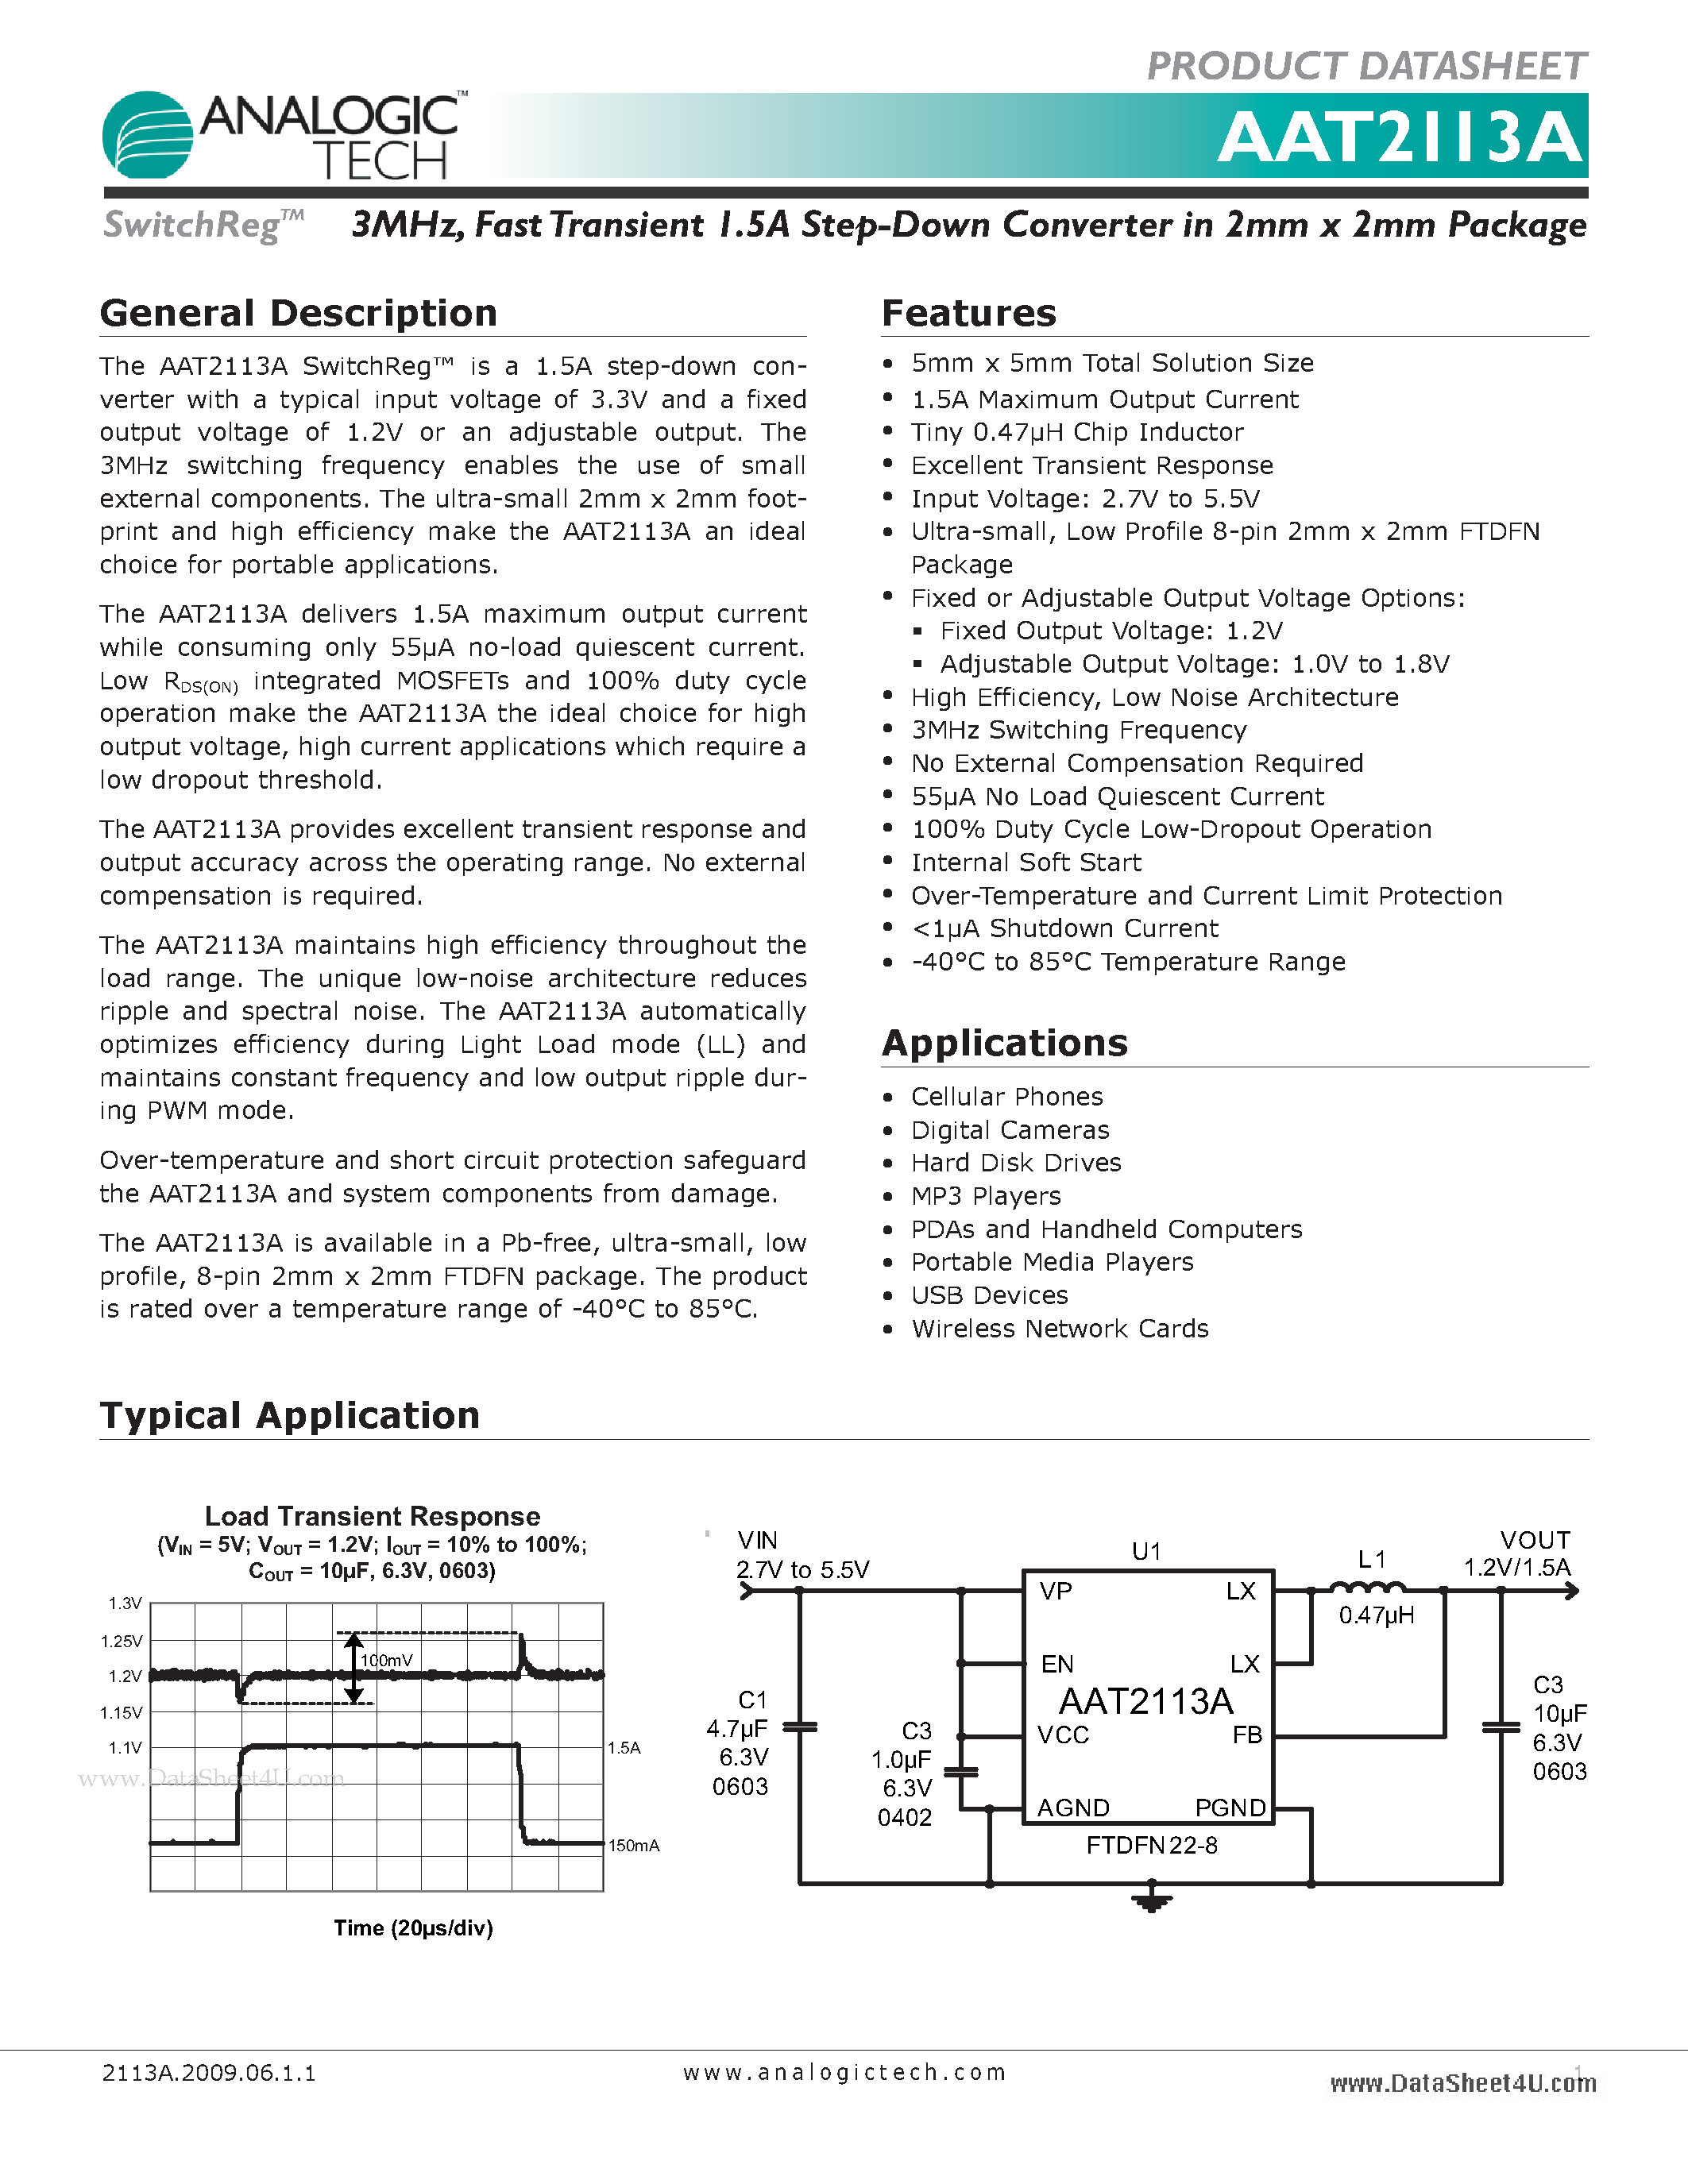 Datasheet AAT2113A - Fast Transient 1.5A Step-Down Converter page 1